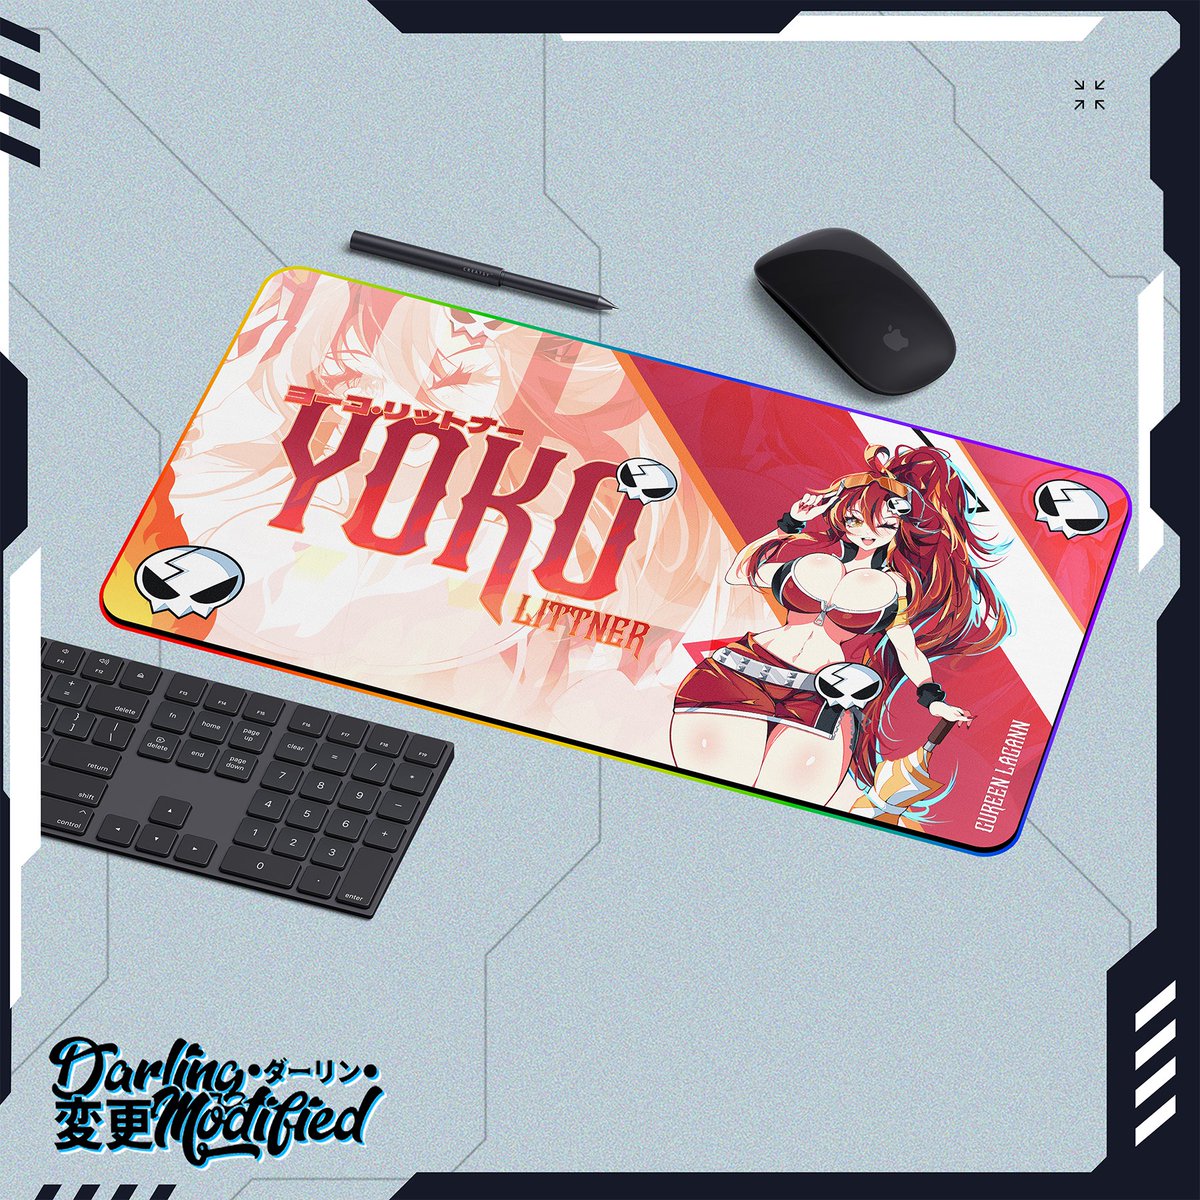 Sneak peaks to our newest mousepads ! They are now available for purchase at darlingmodified.com Artist : @Pale_Riderz Pre orders will close Tuesday 12/19